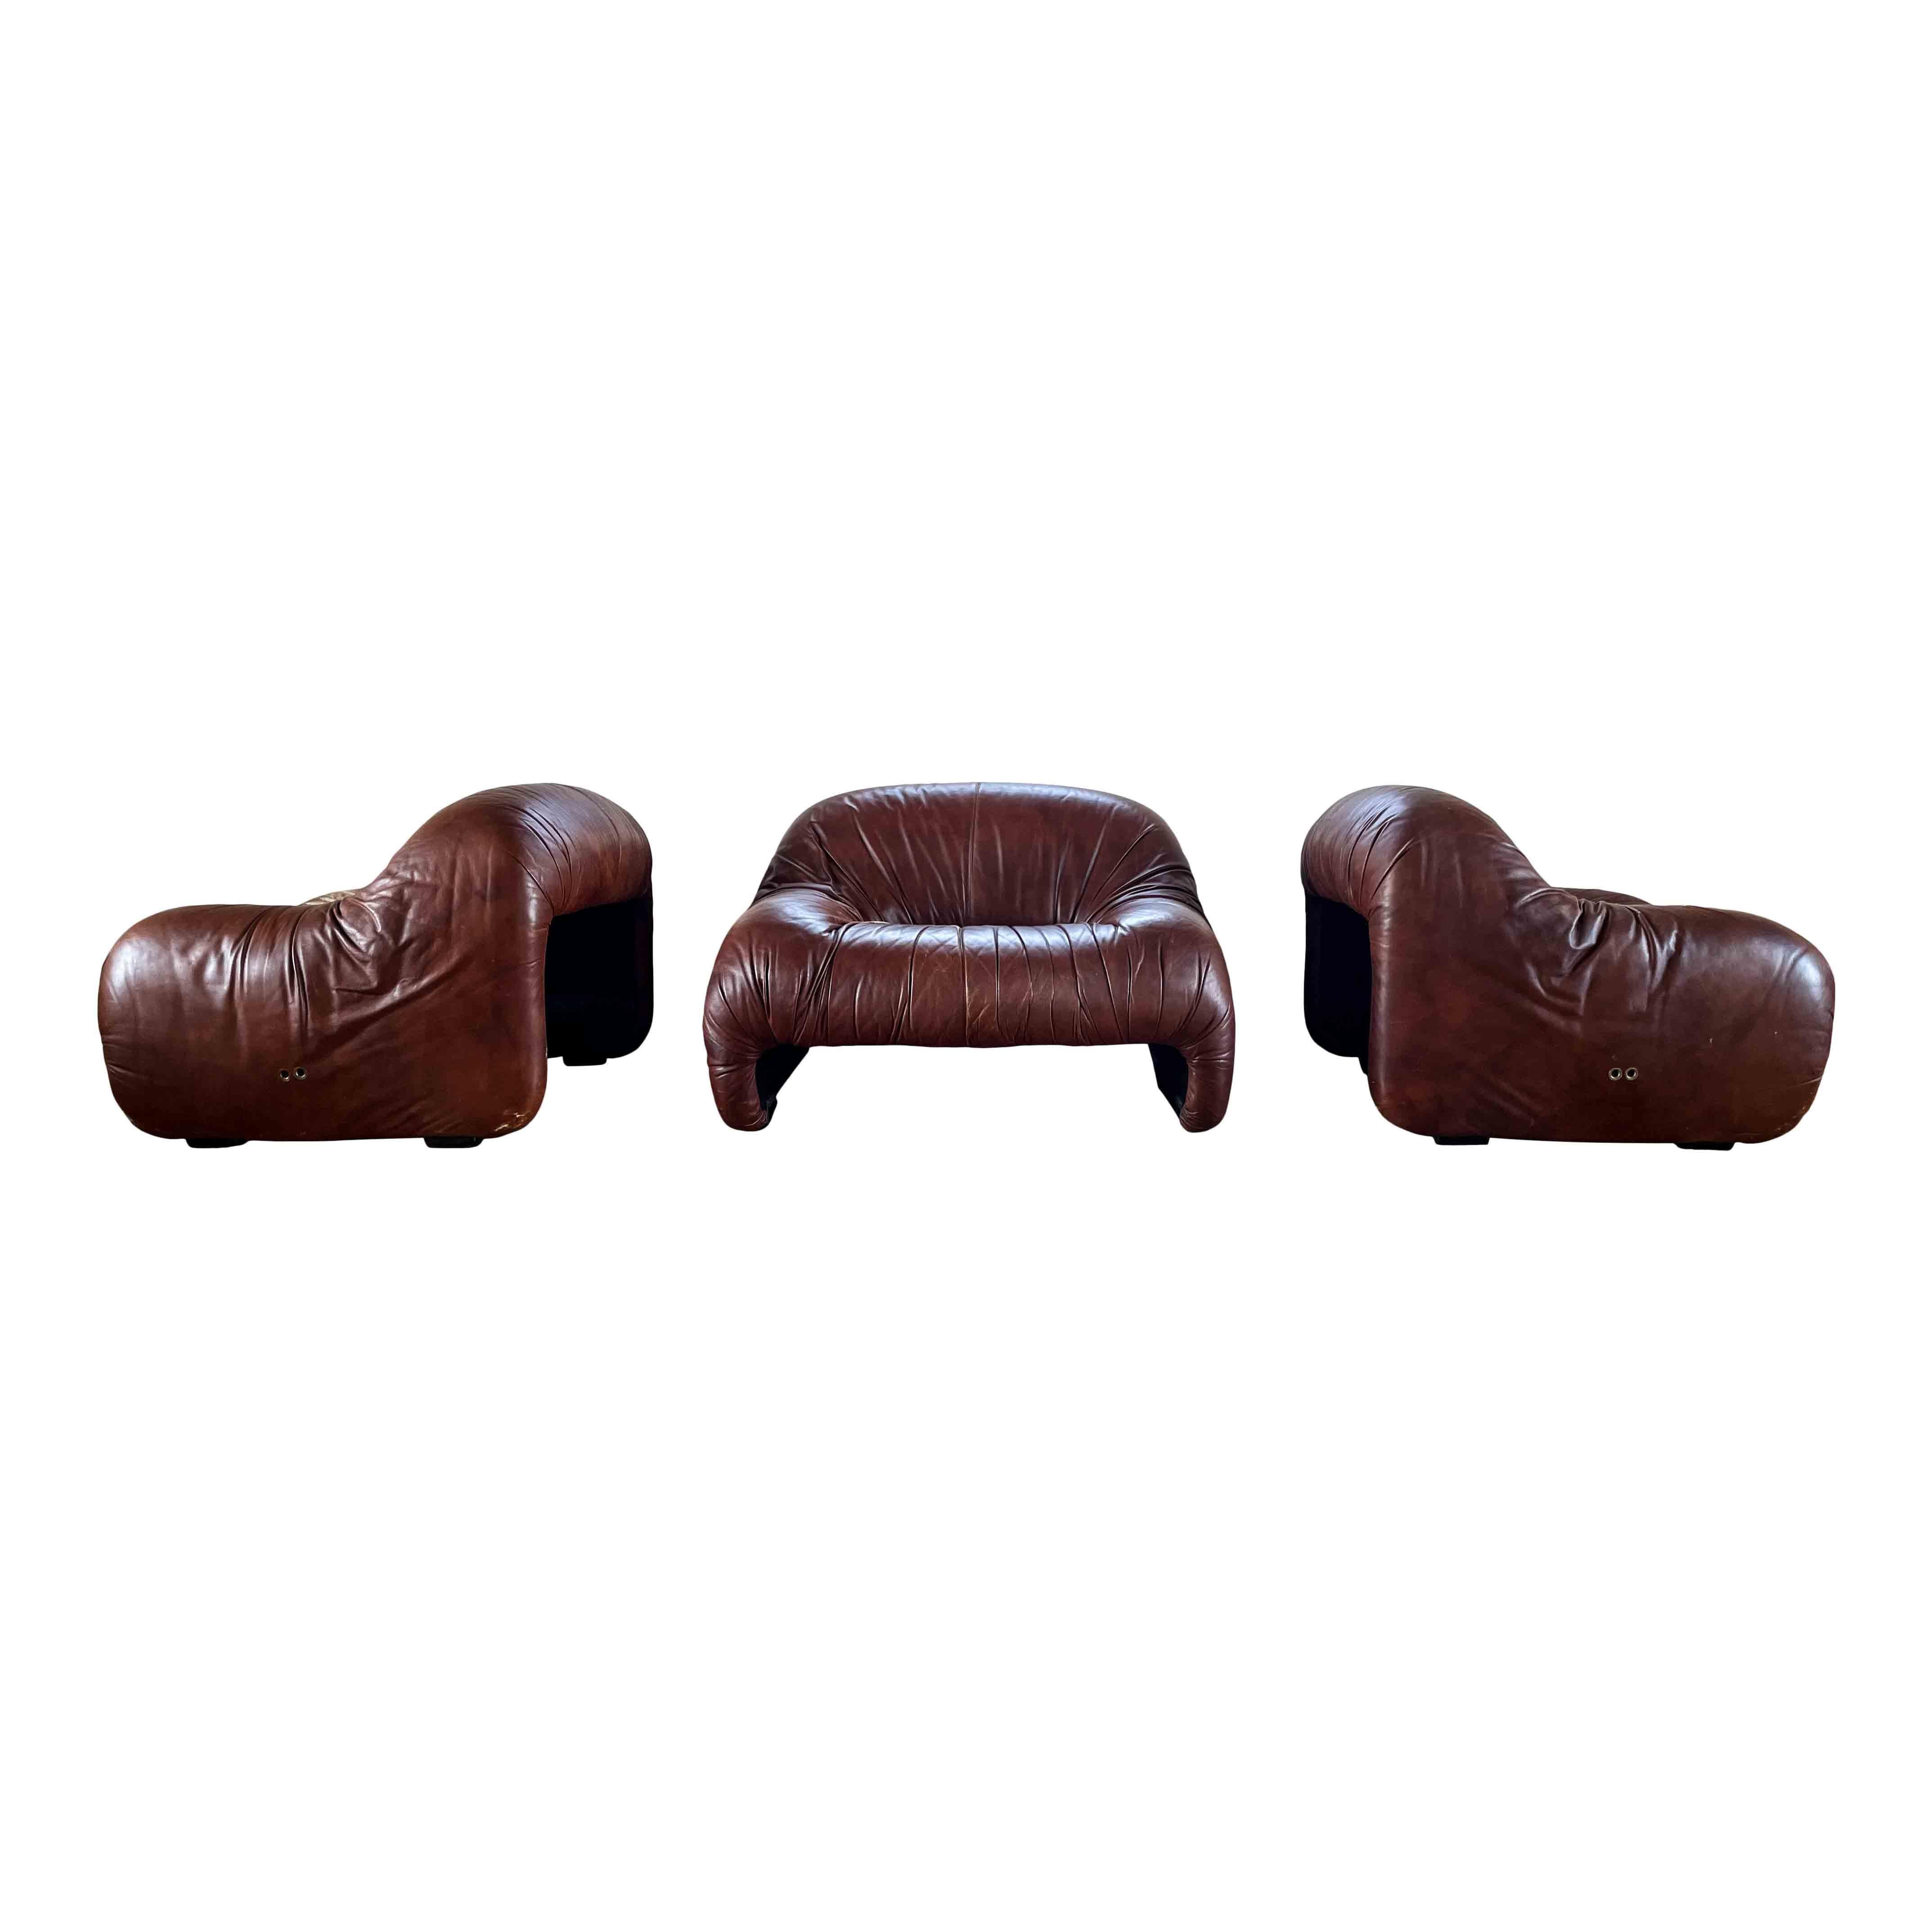 Space Age Afra and Tobia Scarpa Brown Bonanza Lounge Chair for C&B Italia, 1970, Set of 3 For Sale